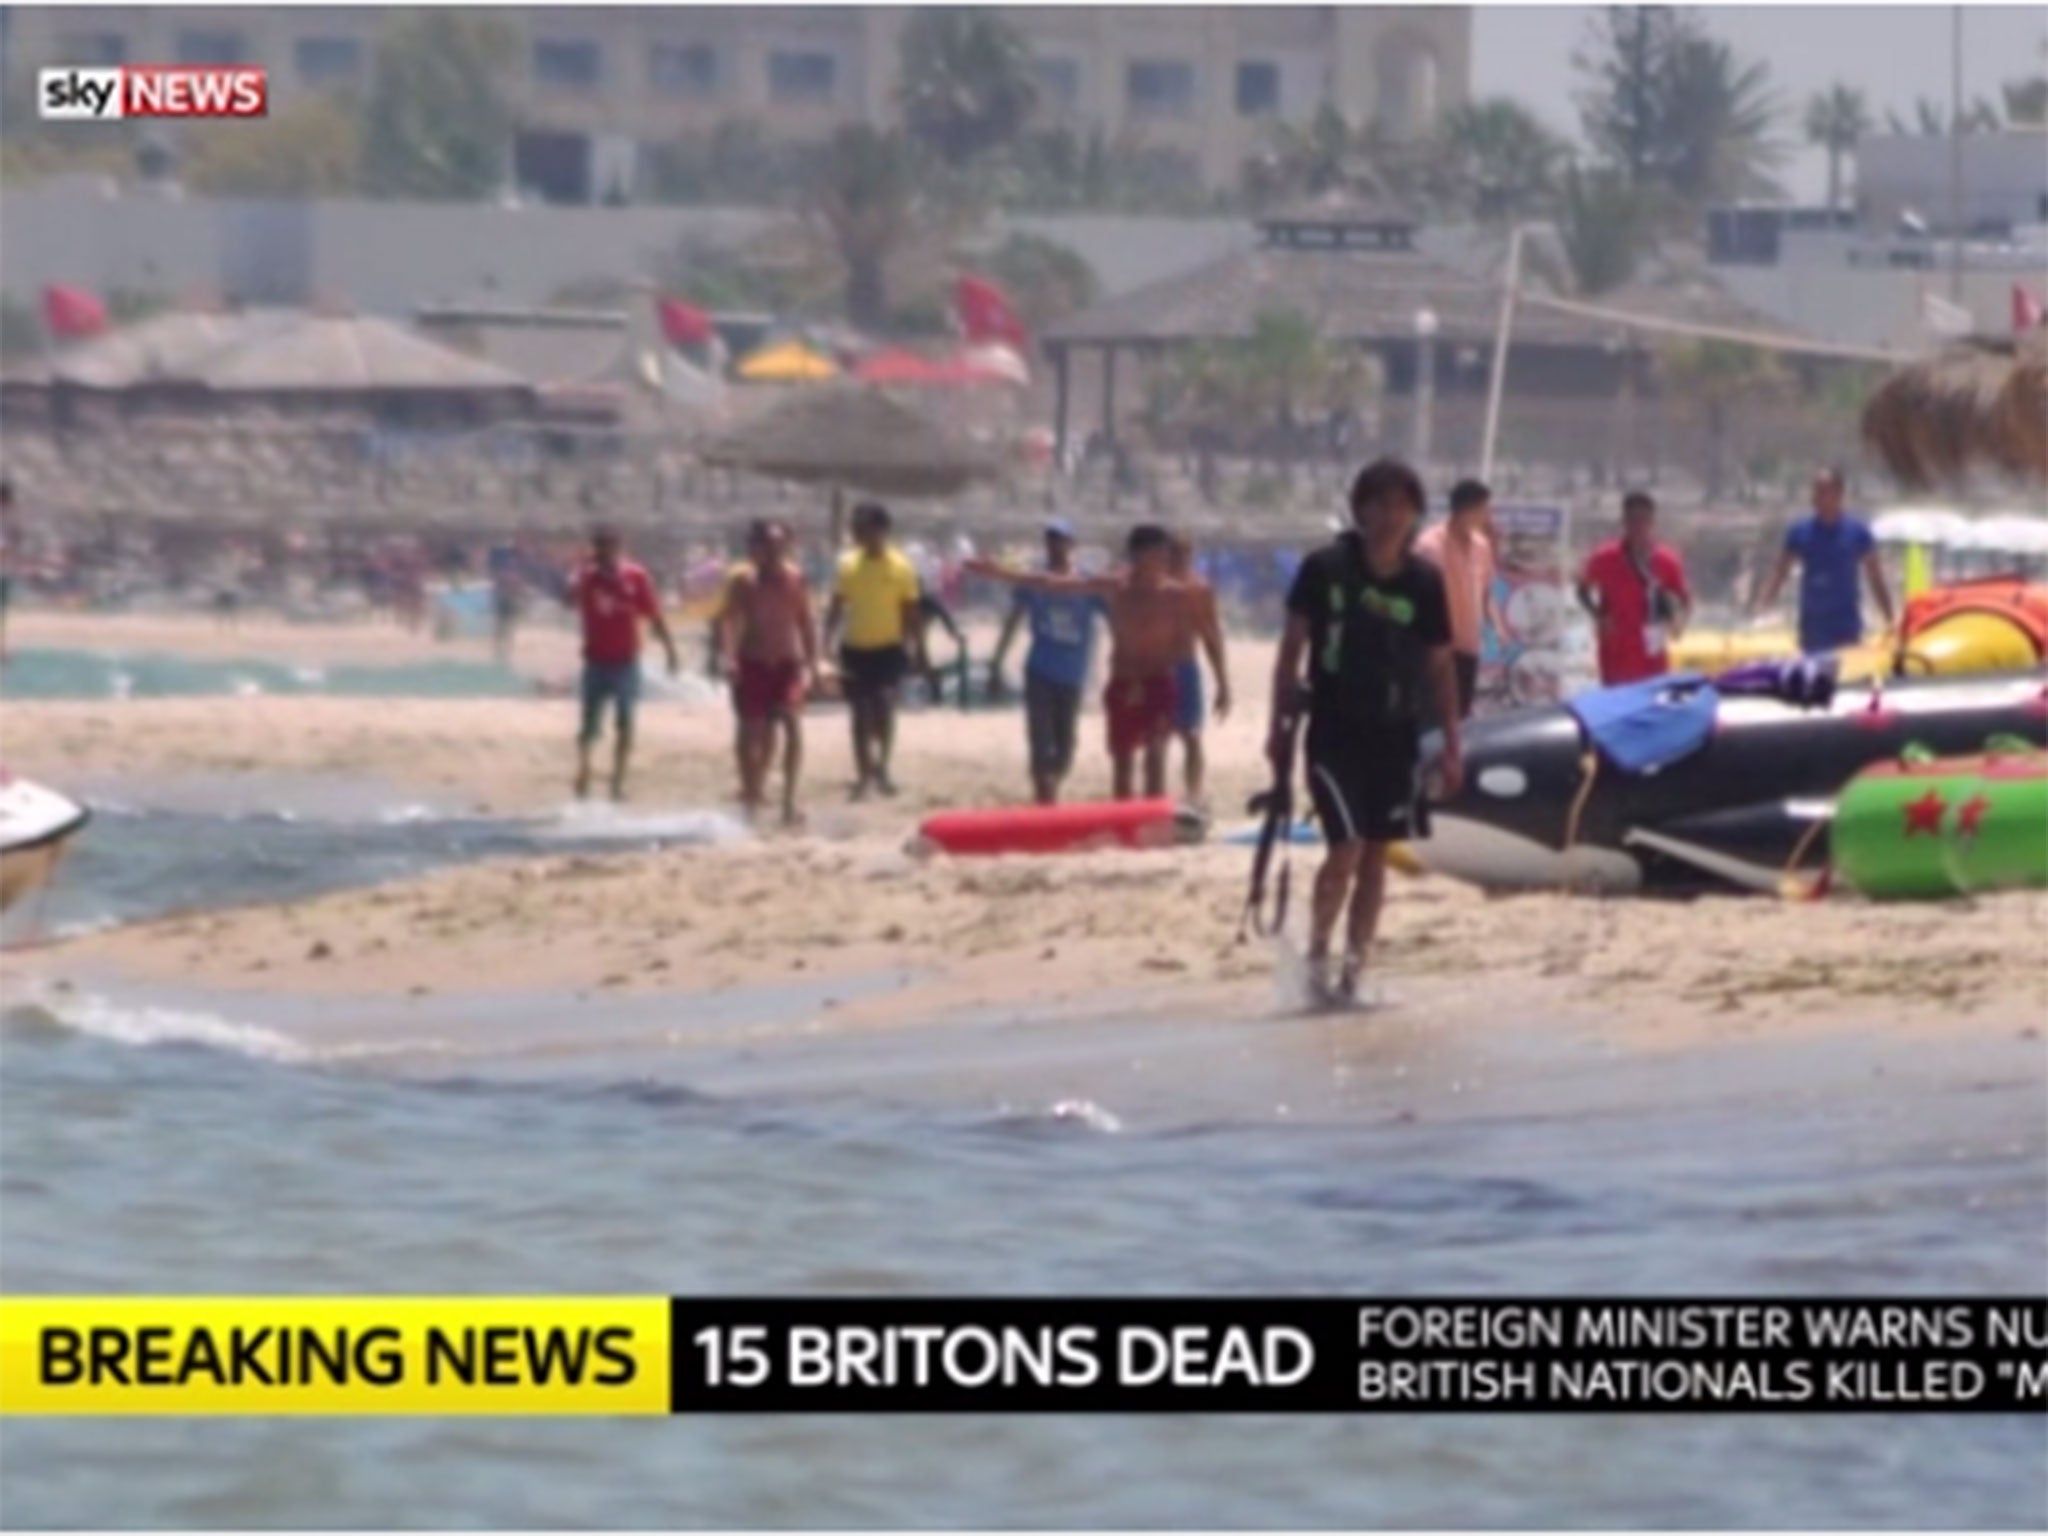 Images obtained by Sky News show the immediate aftermath of the shooting at a beach in Sousse, Tunisia